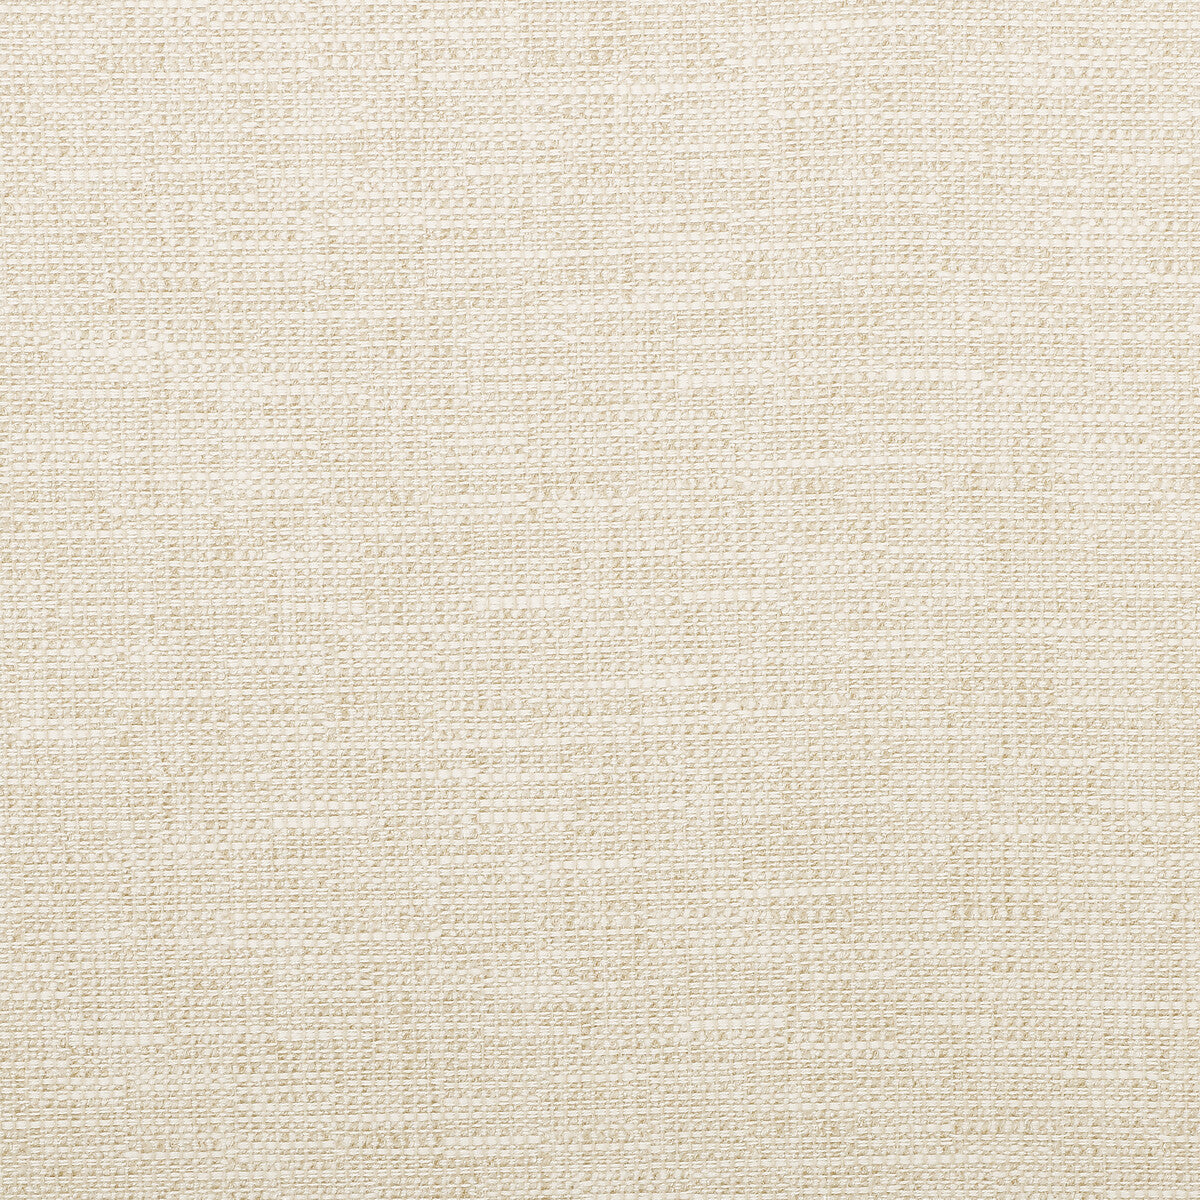 Kravet Smart fabric in 35518-1116 color - pattern 35518.1116.0 - by Kravet Smart in the Inside Out Performance Fabrics collection